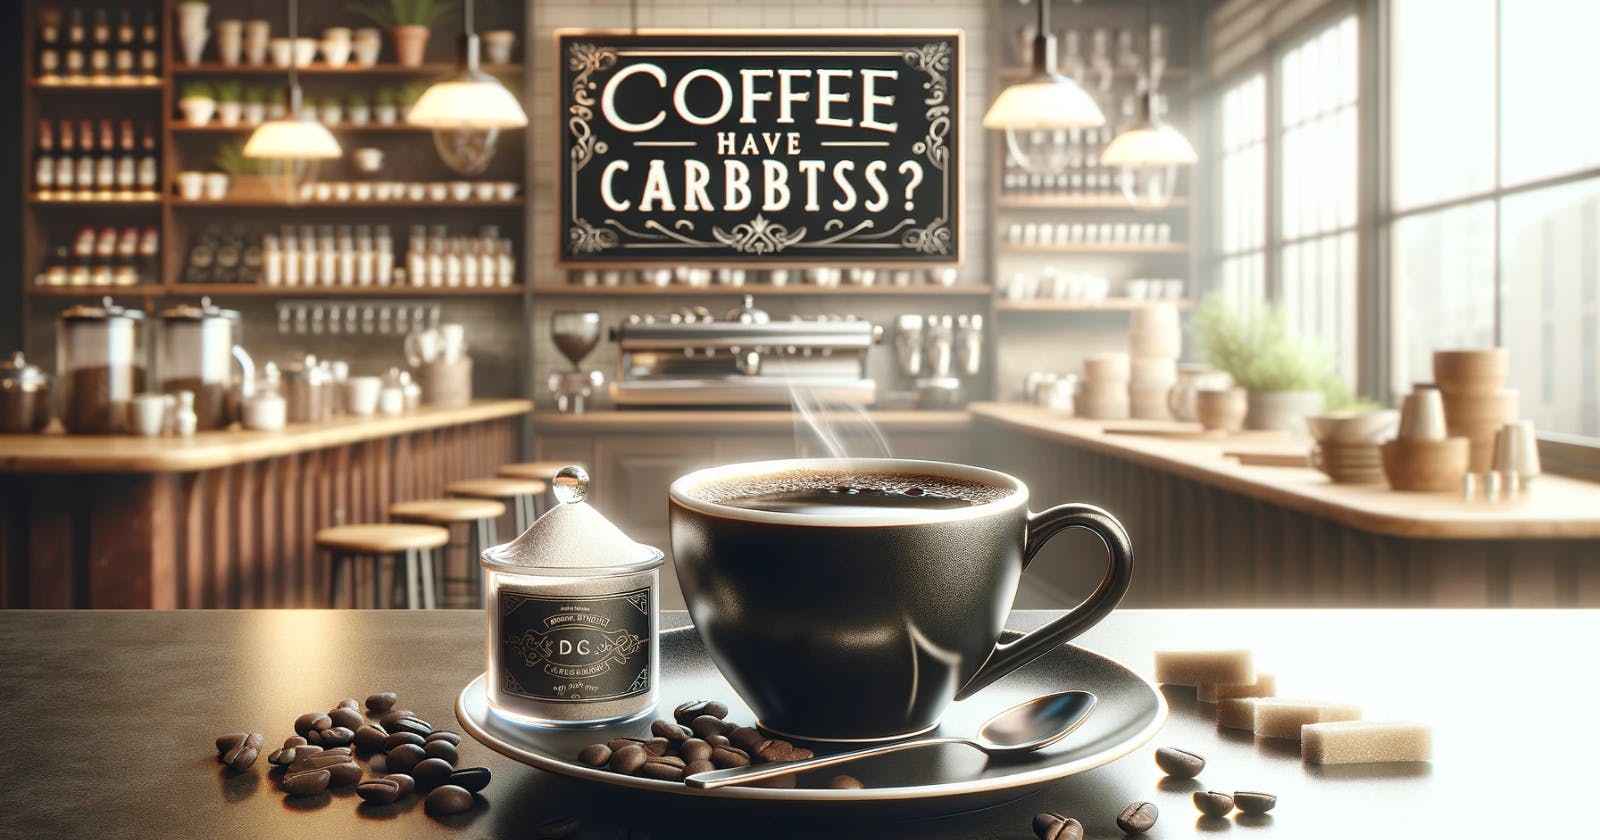 Does Coffee Have Carbs?